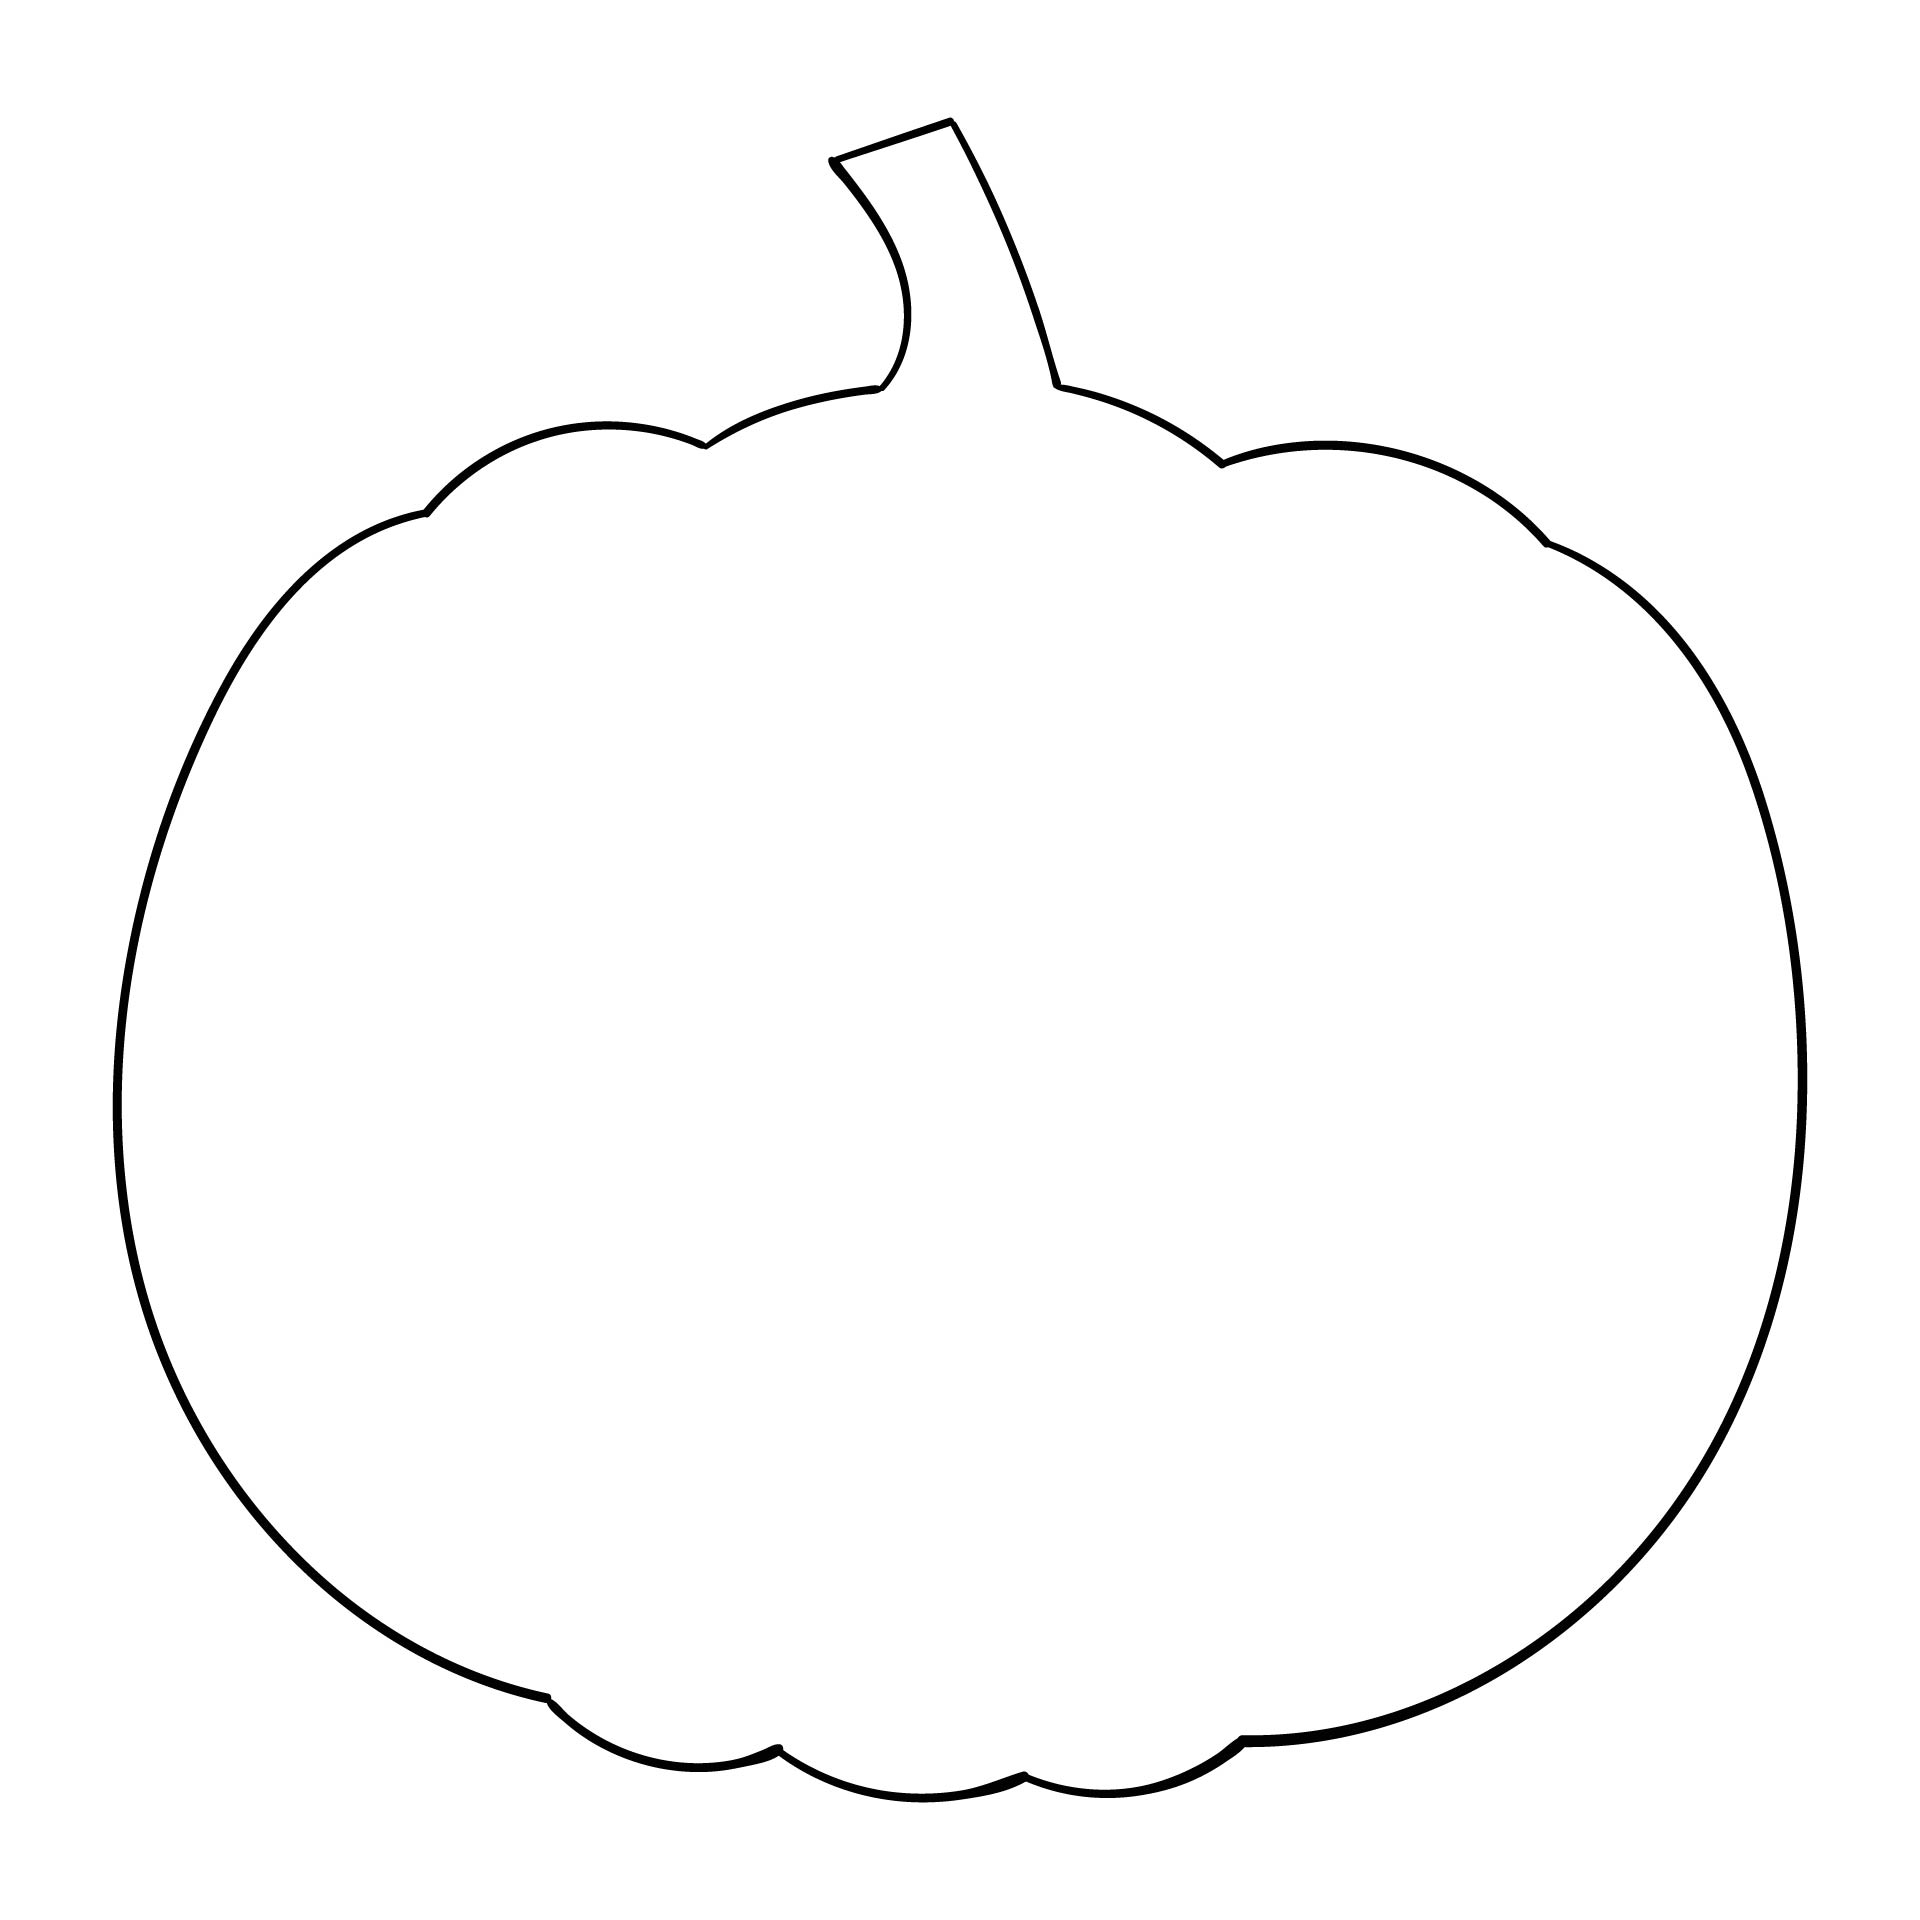 7-best-images-of-pumpkin-pattern-free-printable-coloring-pages